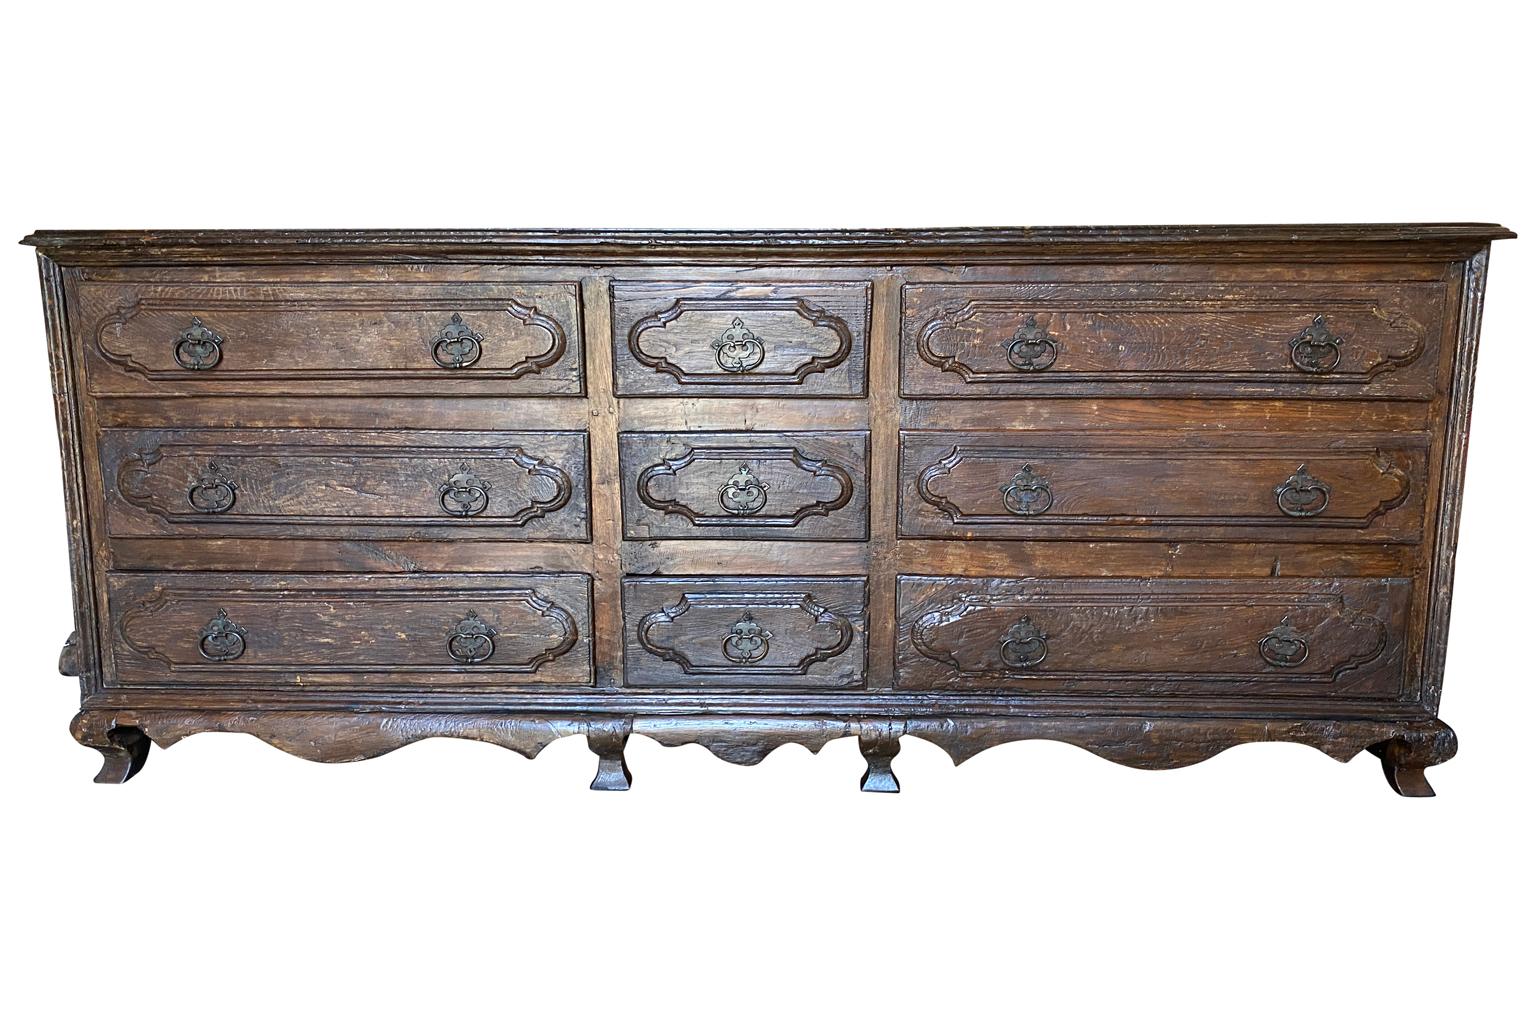 A monumental and very rare 17th century Sacristy Commode from Venice, Italy. Wonderfully constructed from chestnut with nine drawers and a sculpted apron. A truly impressive piece that will be the star of its surrounding.